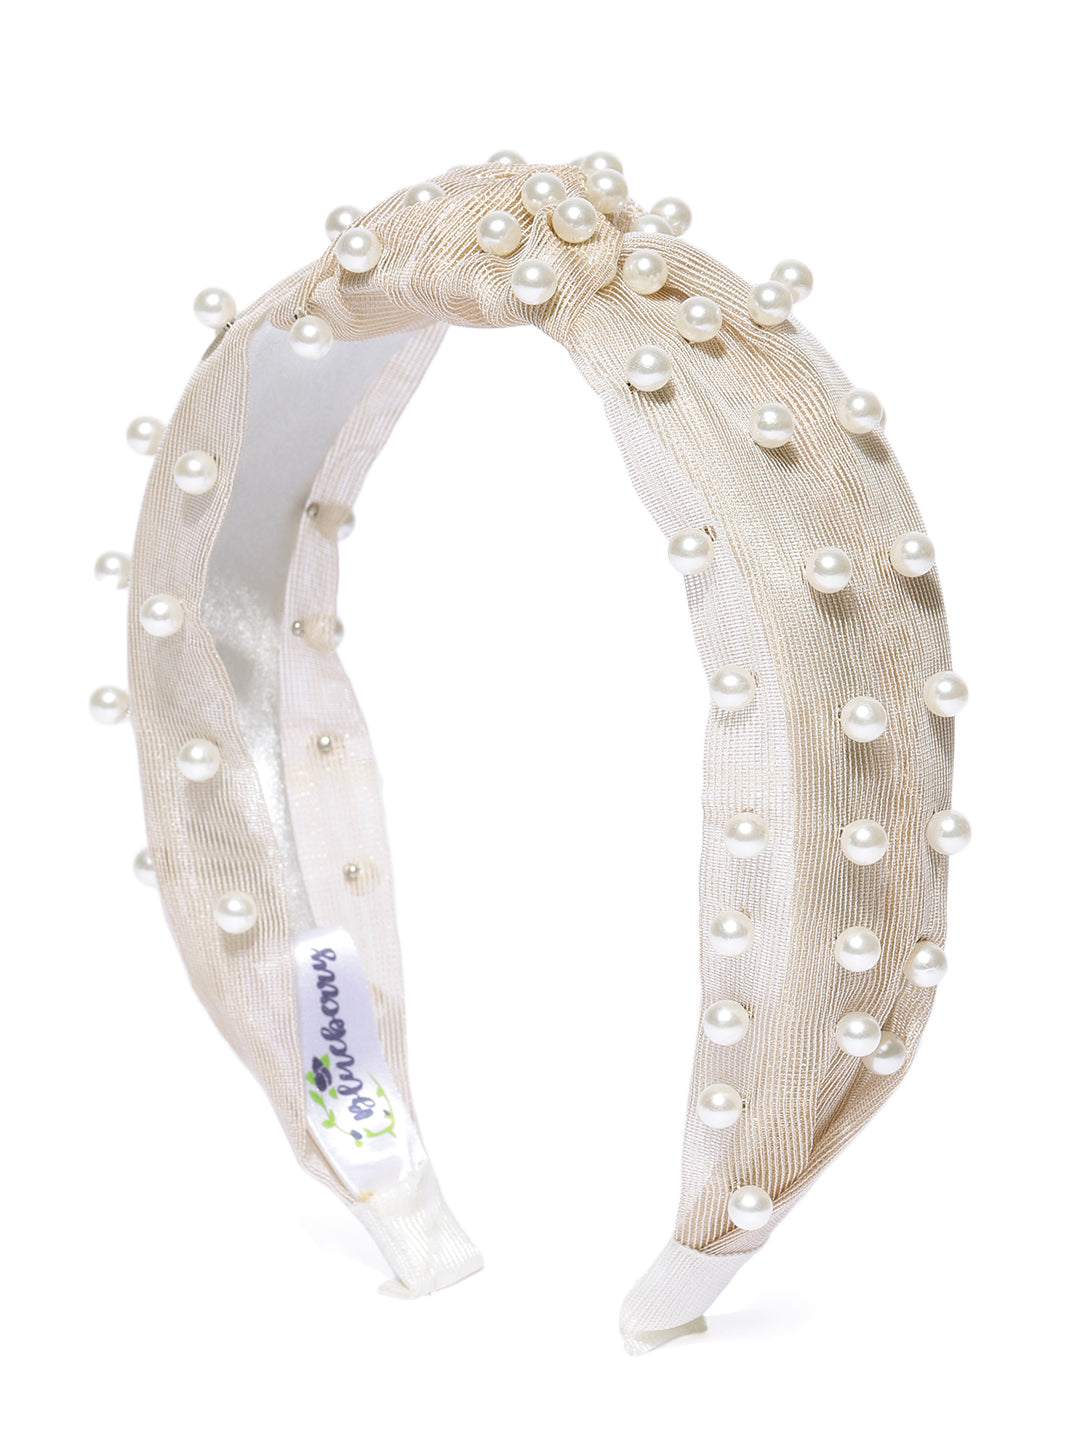 Blueberry princess pearl embellished Gold knot hair band